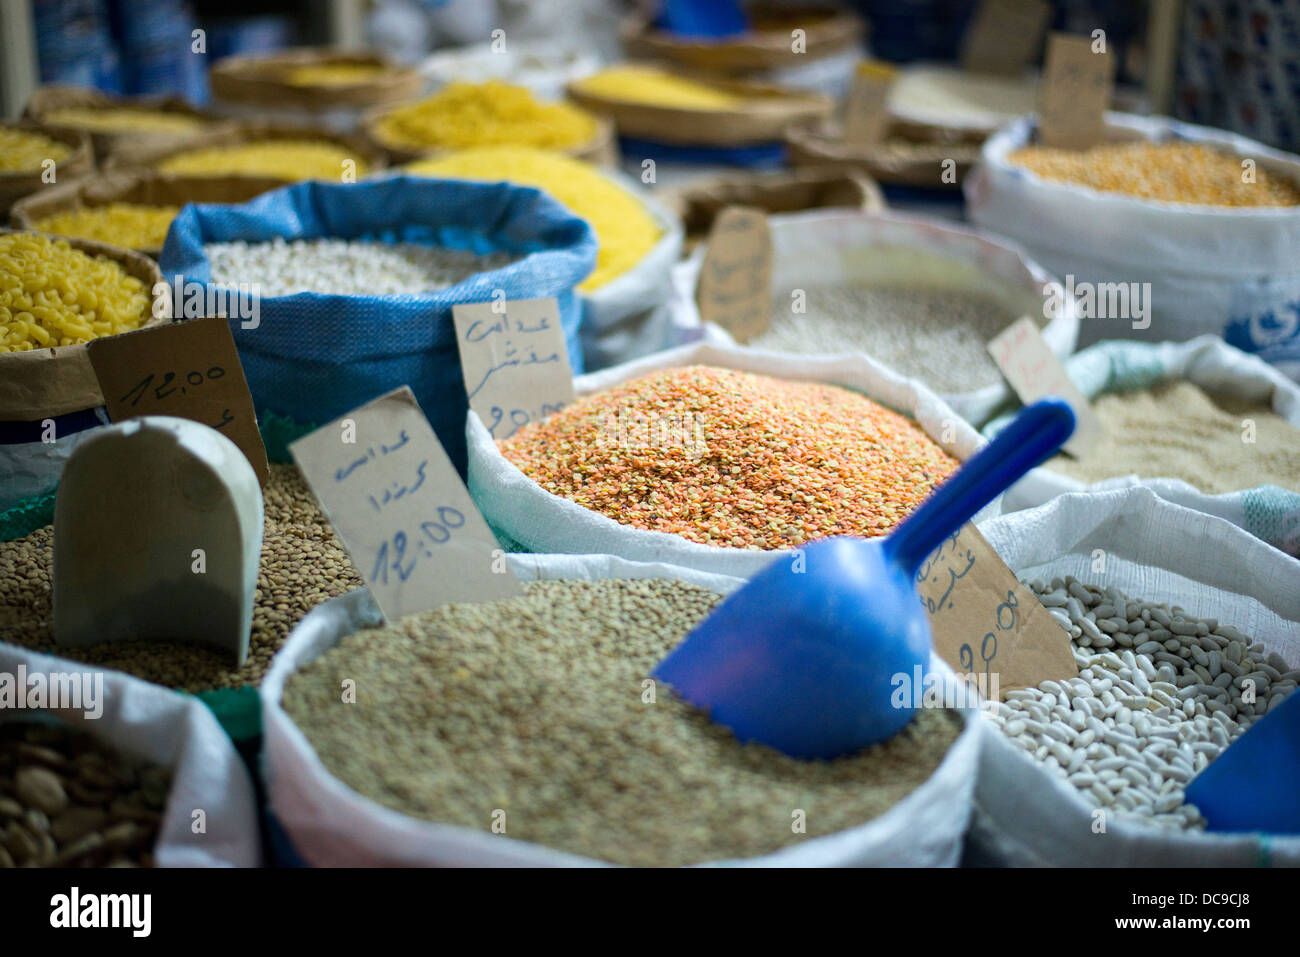 A detail of different grains for sale in the souk in Tangier, Morocco. Stock Photo